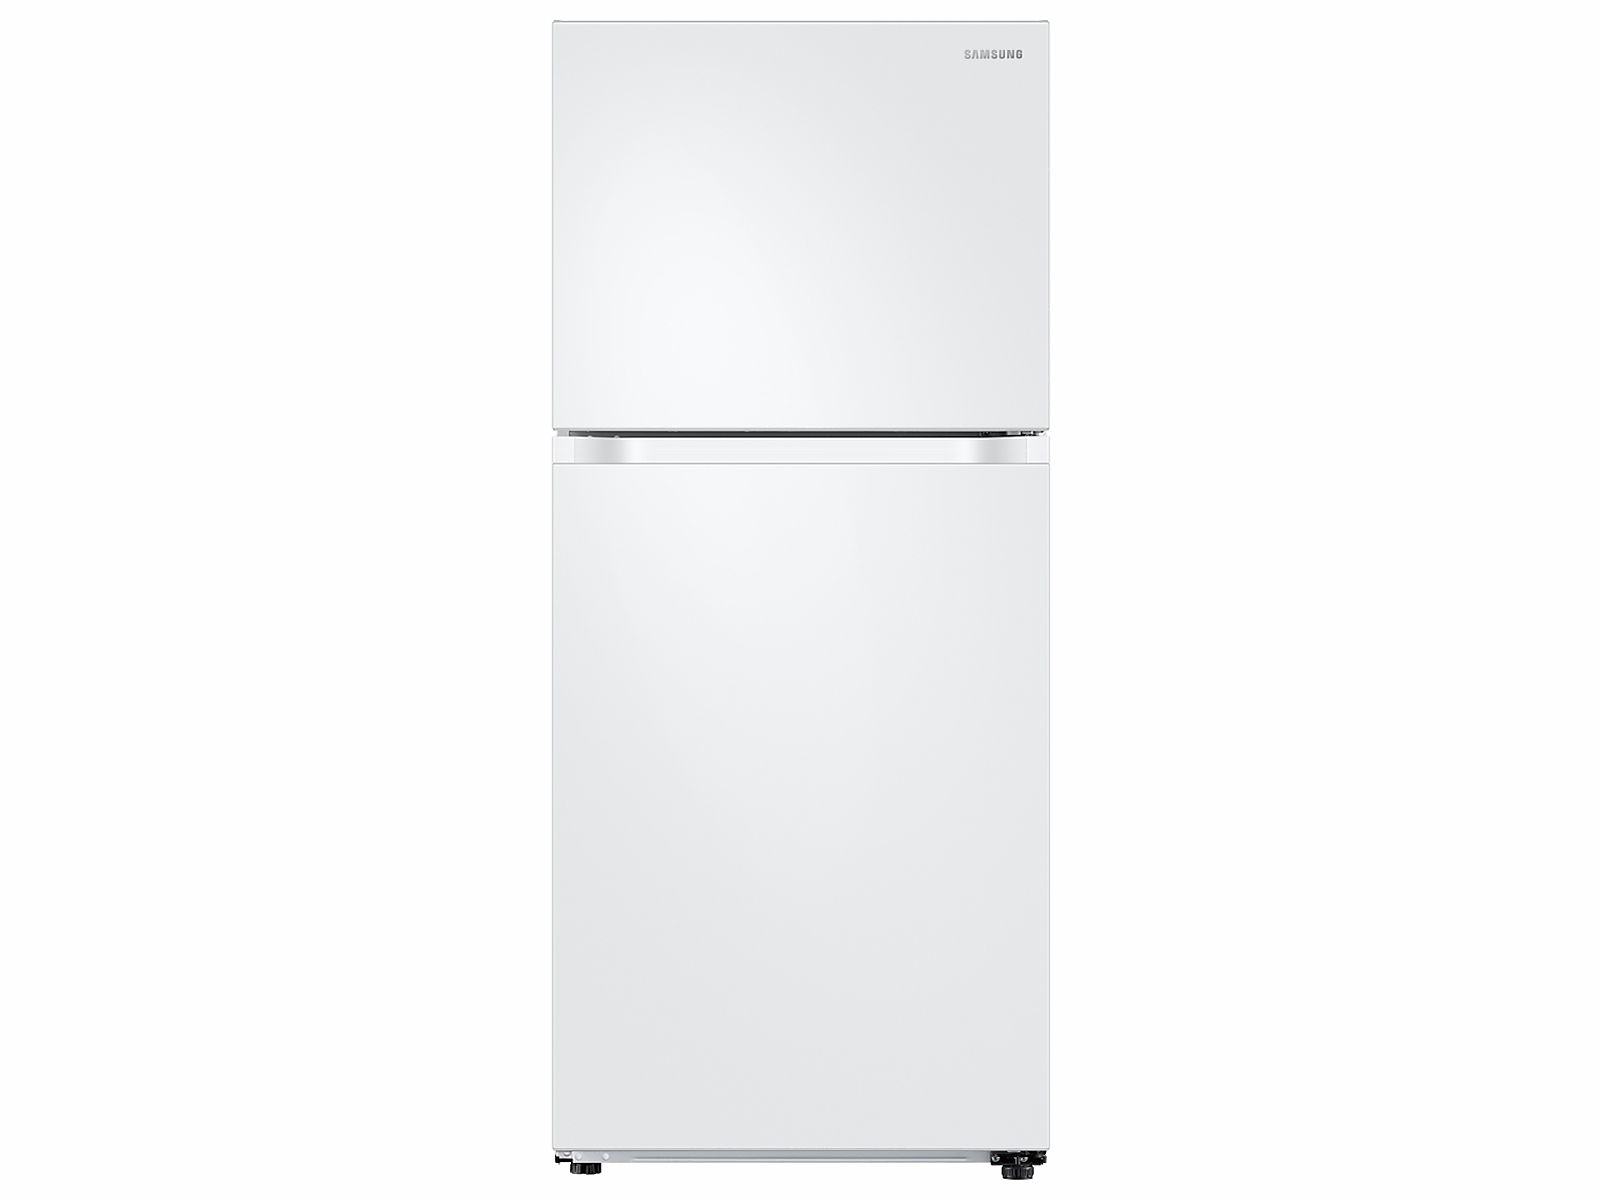 Samsung 18 cu. ft. Top Freezer Refrigerator with FlexZone™ and Ice Maker in White(RT18M6215WW/AA) photo